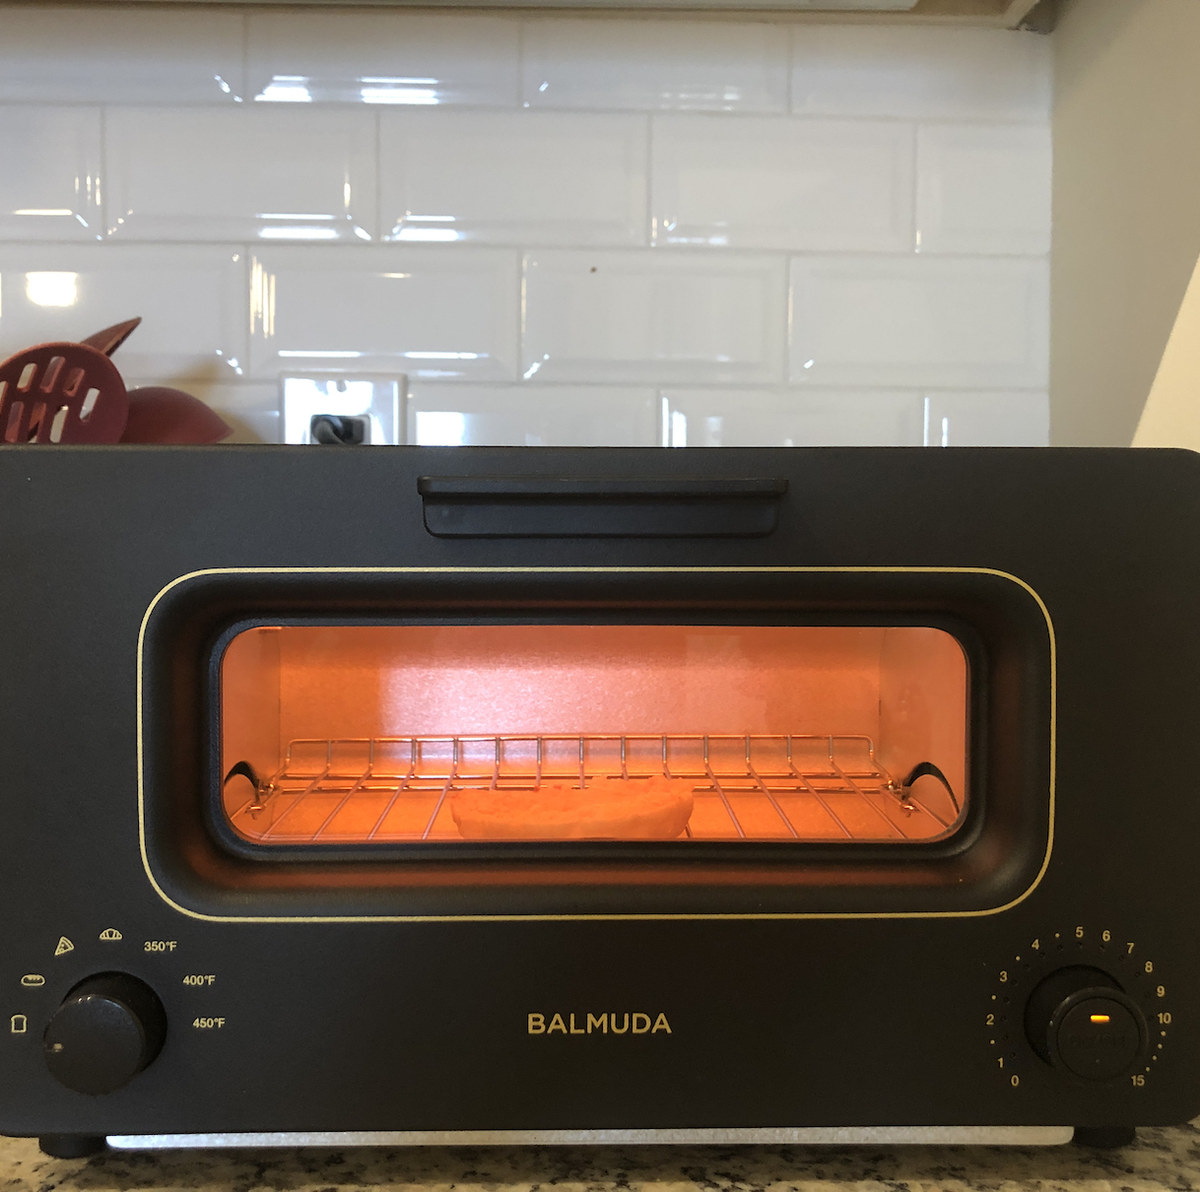 Review: Balmuda The Toaster Is All It's Cracked Up to Be